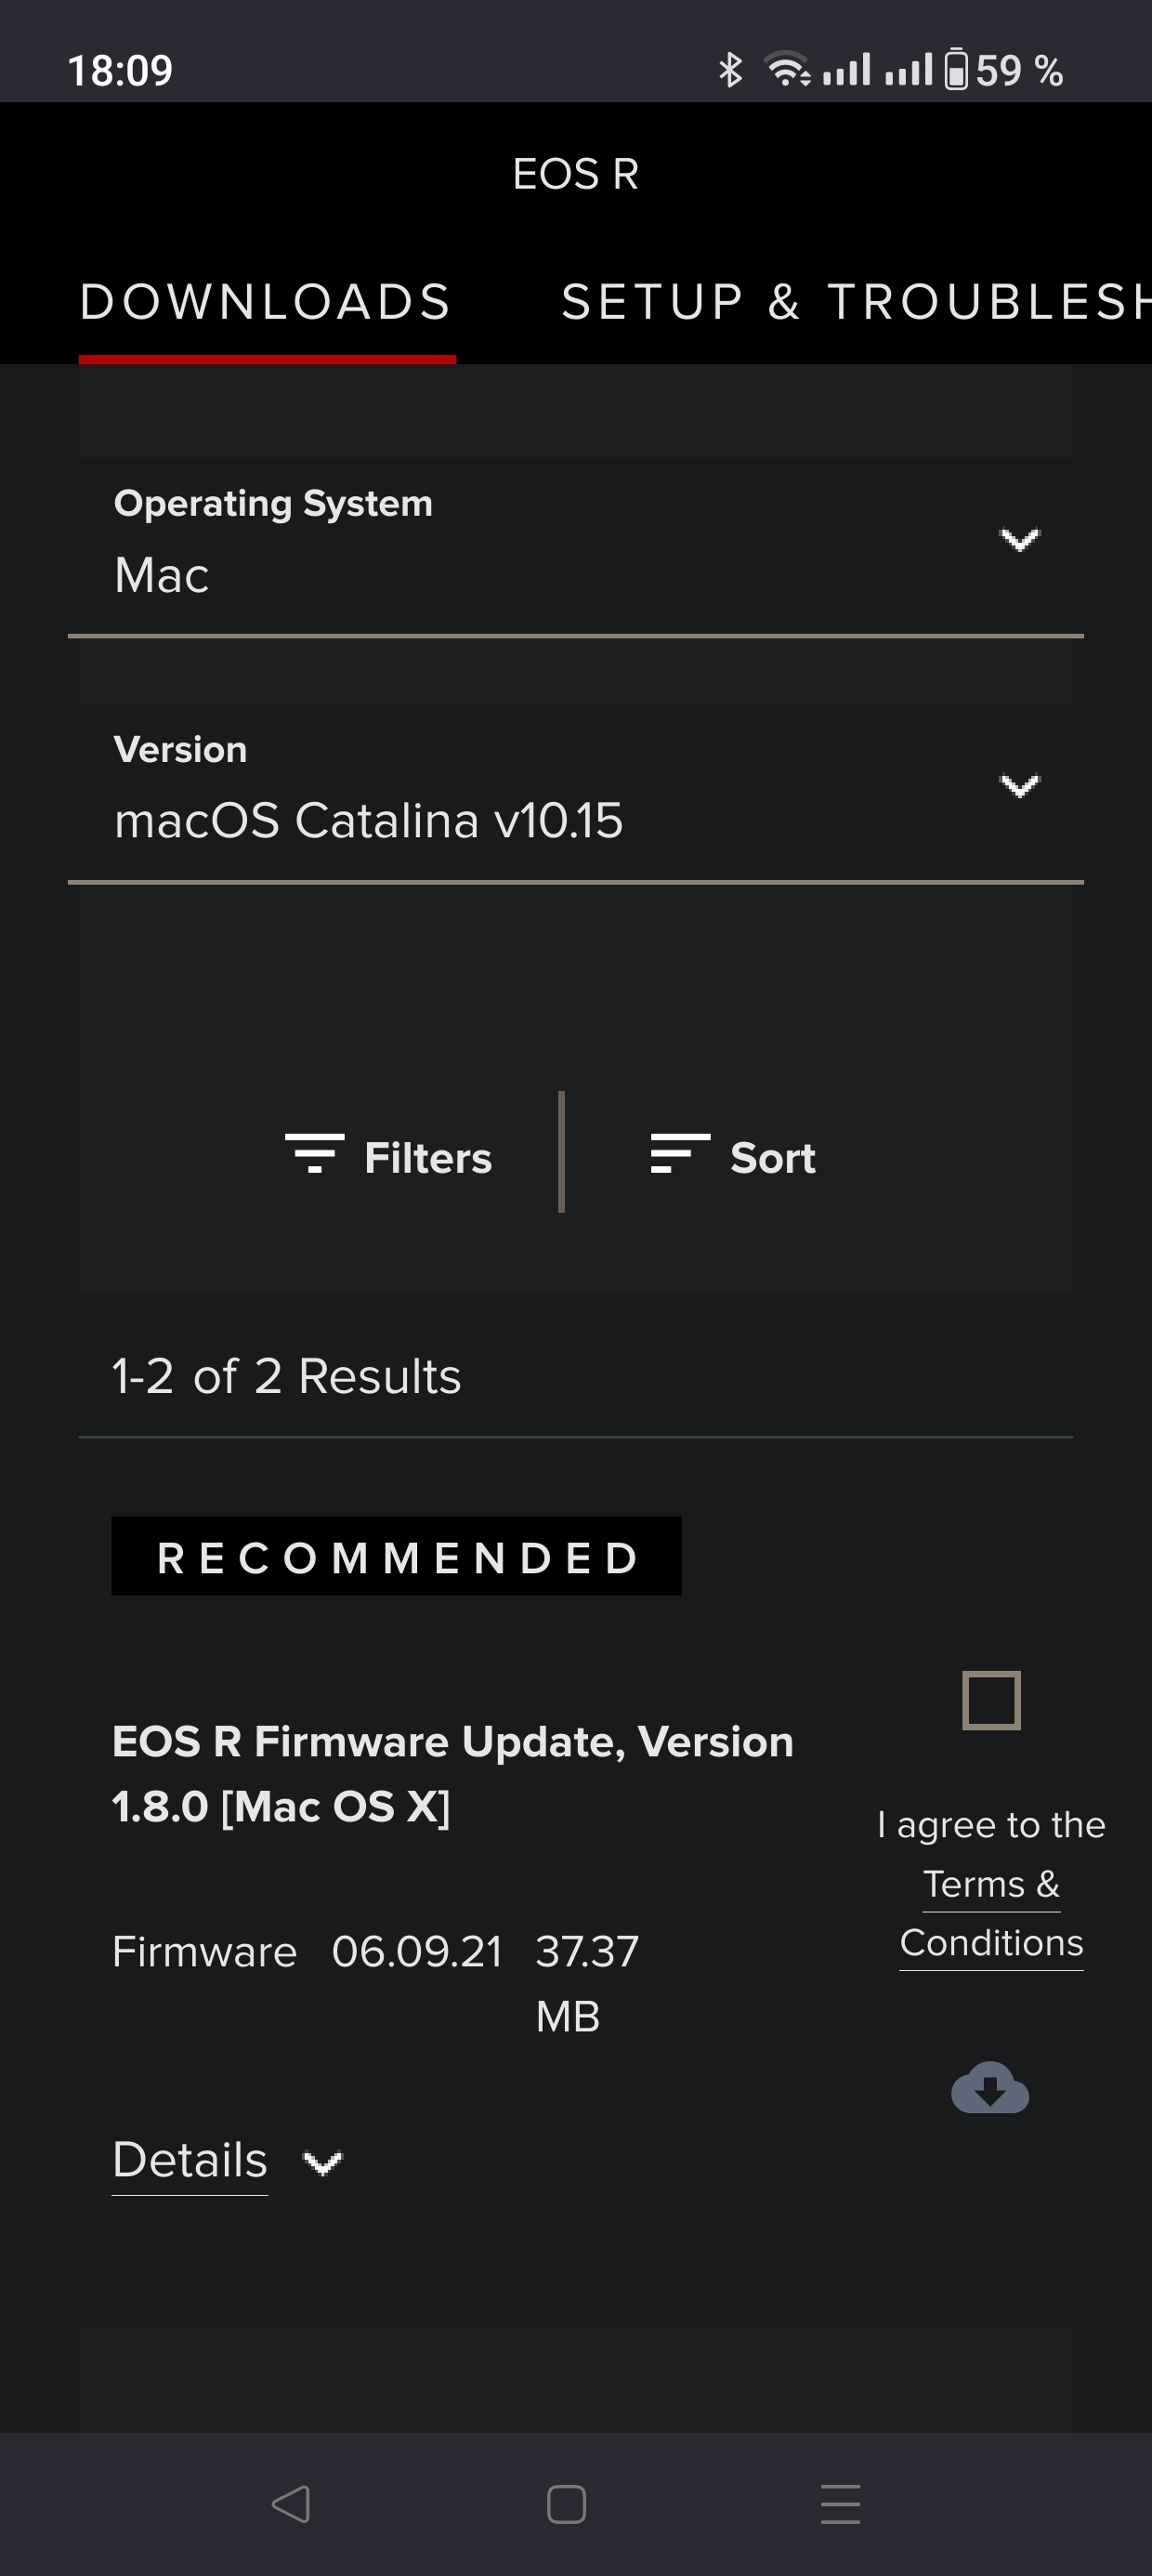 Canon Support for EOS R